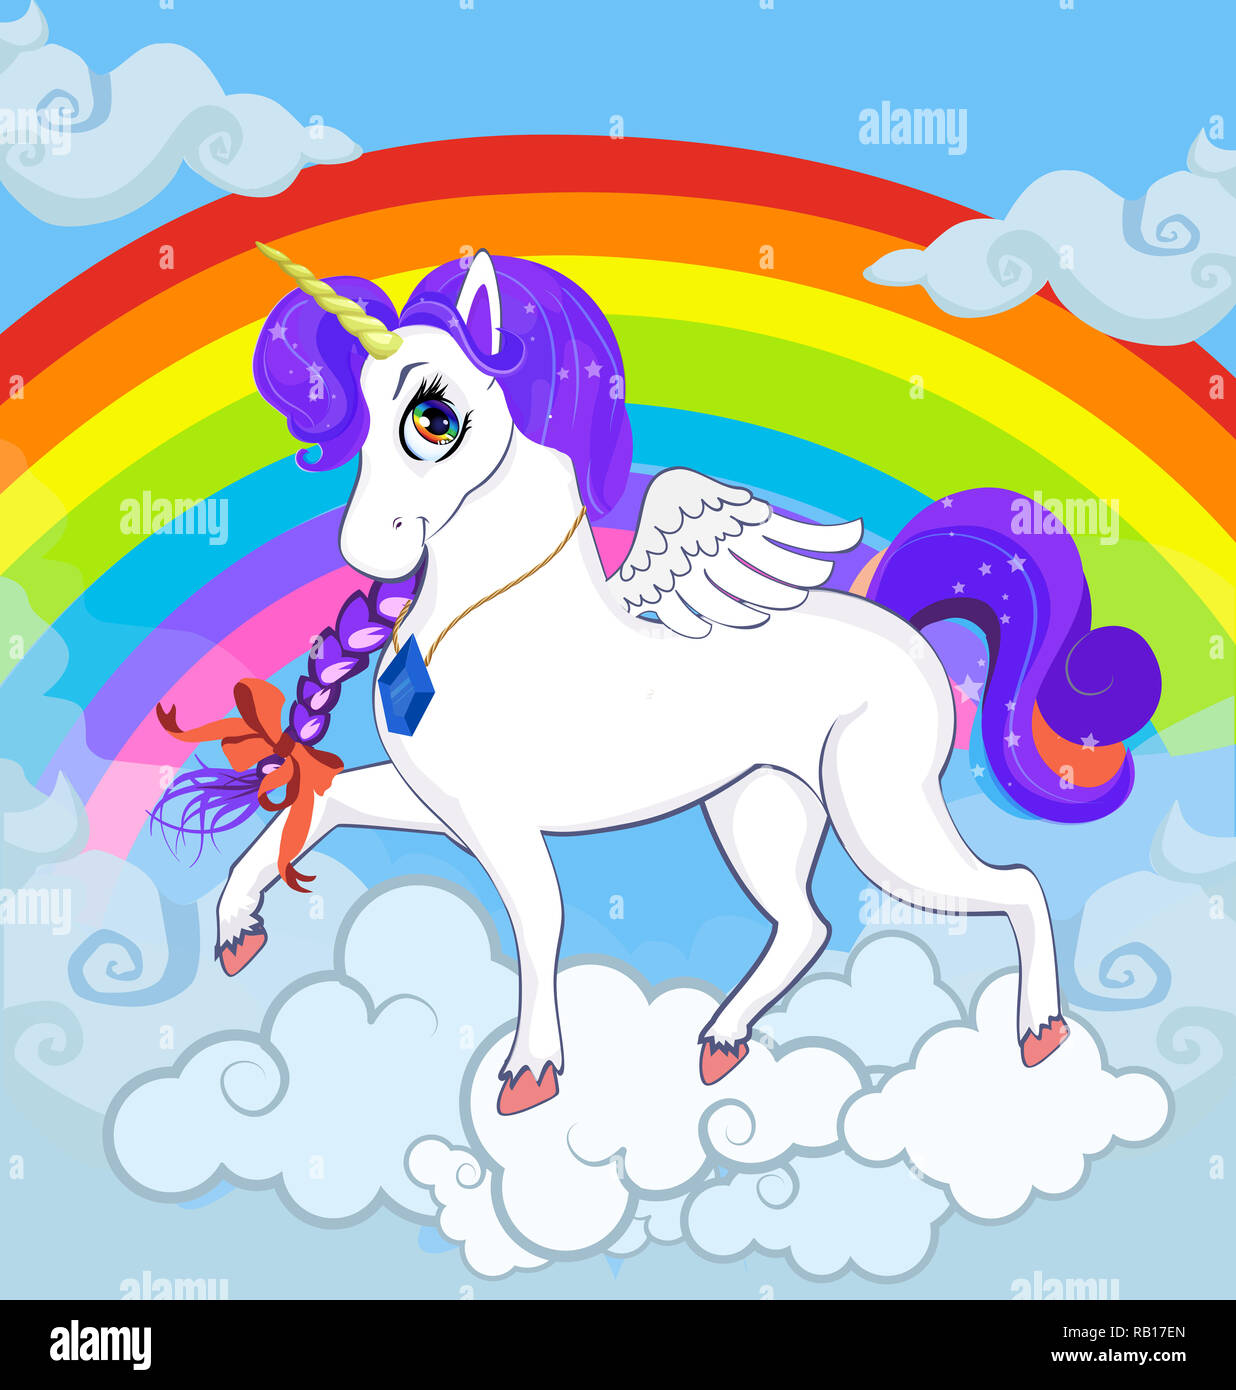 Multicolor cartoon baby Illustration of white pony unicorn princess  character with big eyes, golden horn, feather wings and violet mane  standing on cl Stock Photo - Alamy